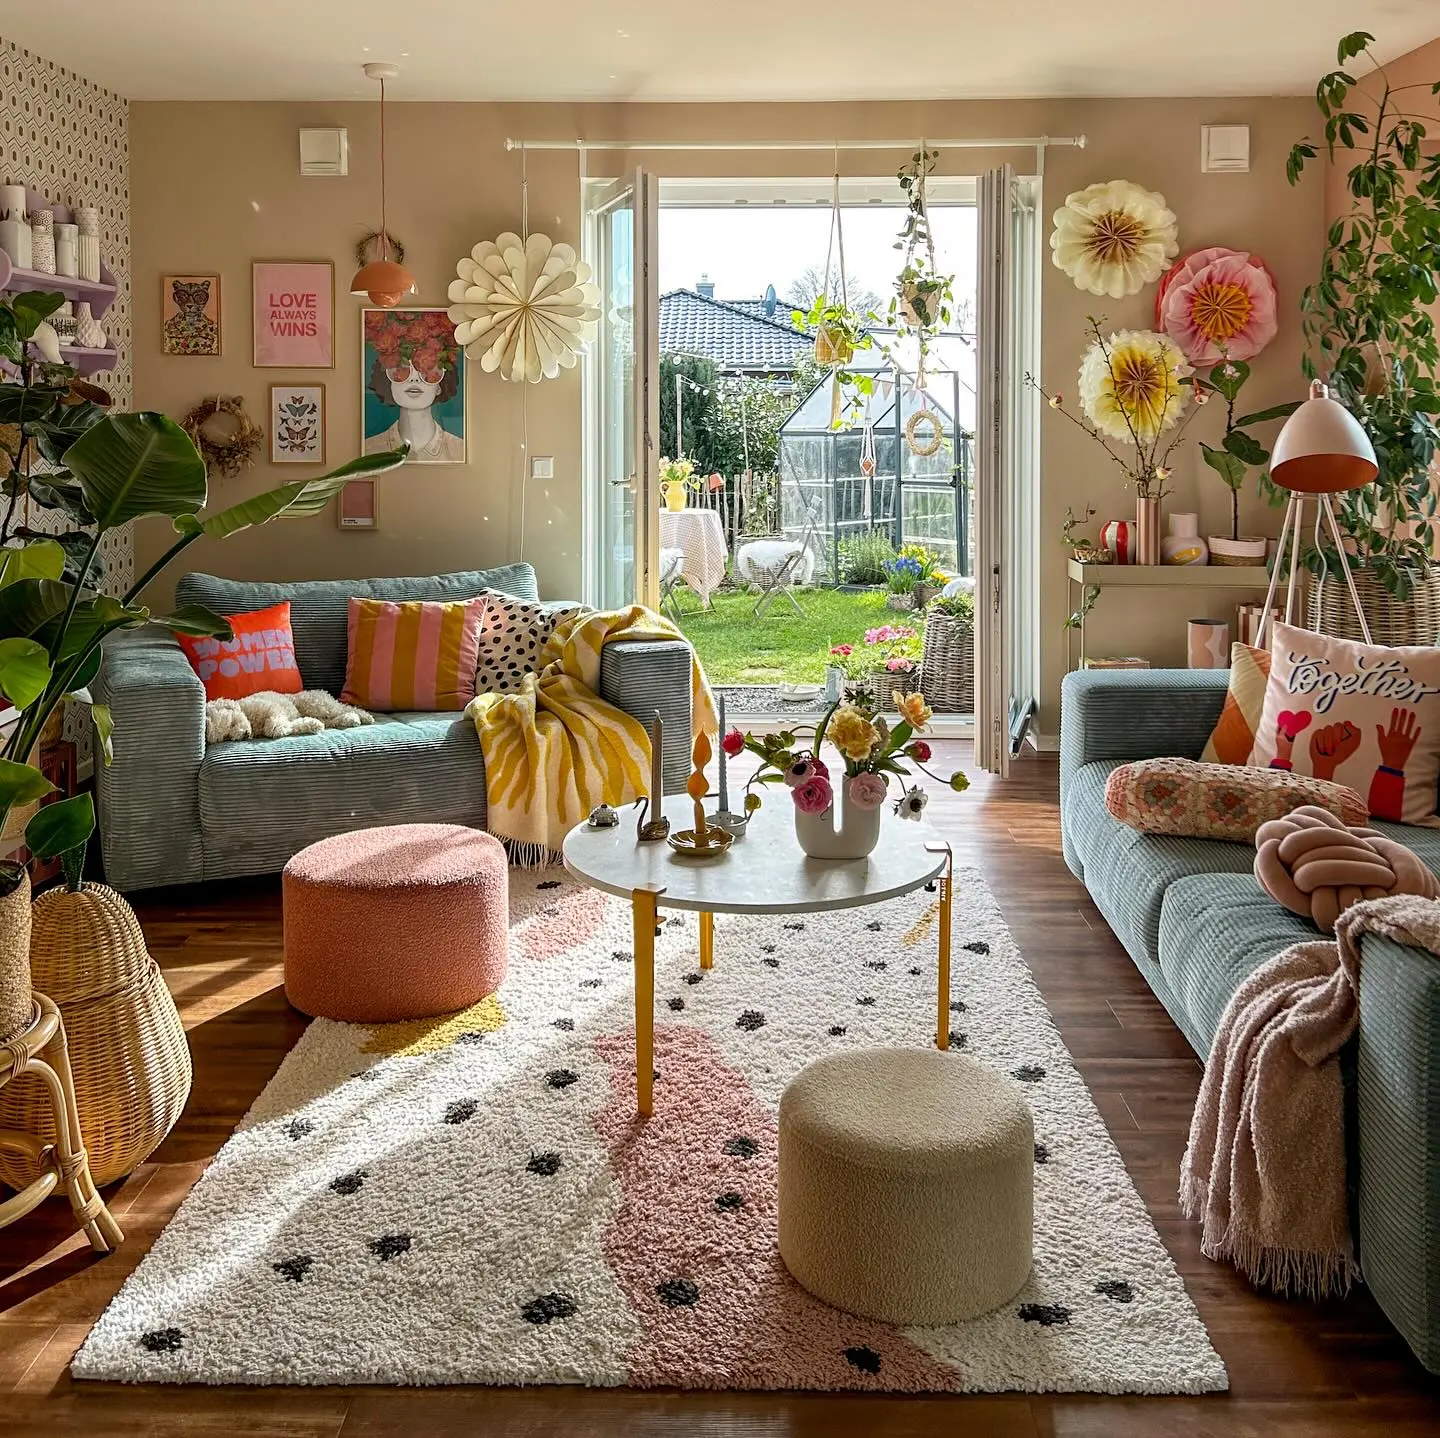 a living room with colorful decor including a mix of patterns in pillows, throws, and floor rugs as well as seatings done well can bring the personality and funky style to an interior.